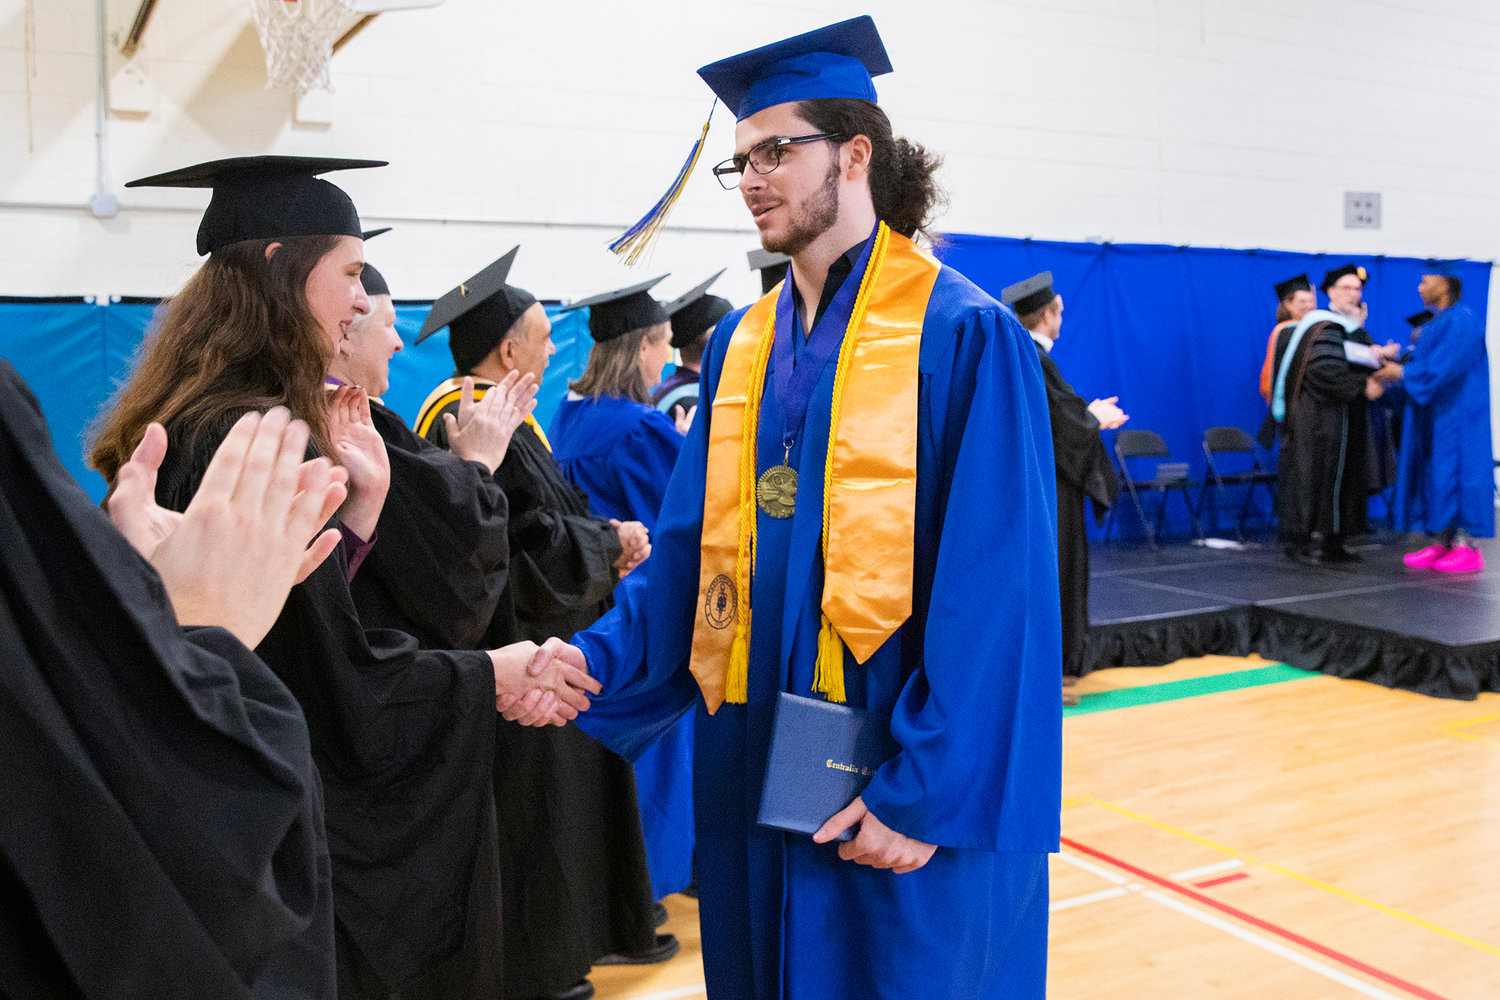 Caya Lenay shakes hands after receiving his diploma during a graduation ceremony for Centralia College graduates held at the Green Hill School on Wednesday in Chehalis.